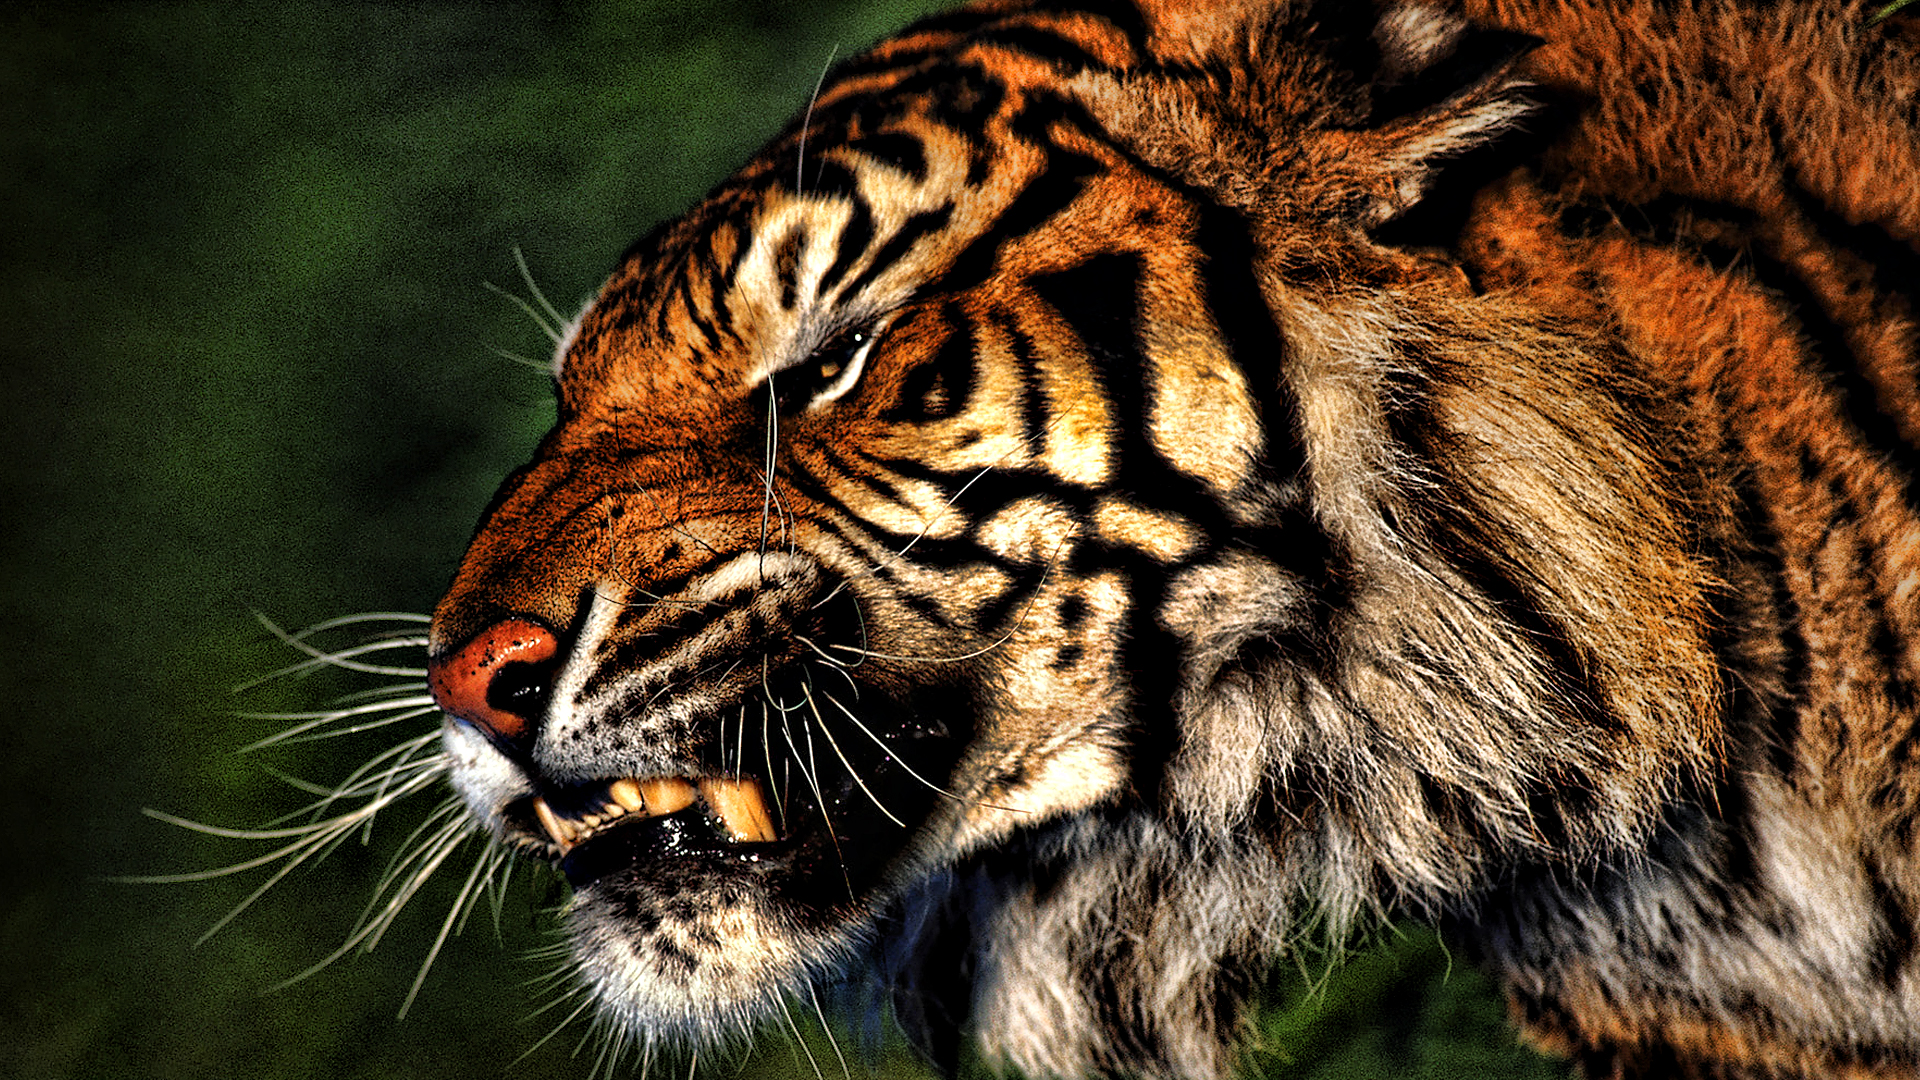 download tiger free wallpaper download which is under the tiger